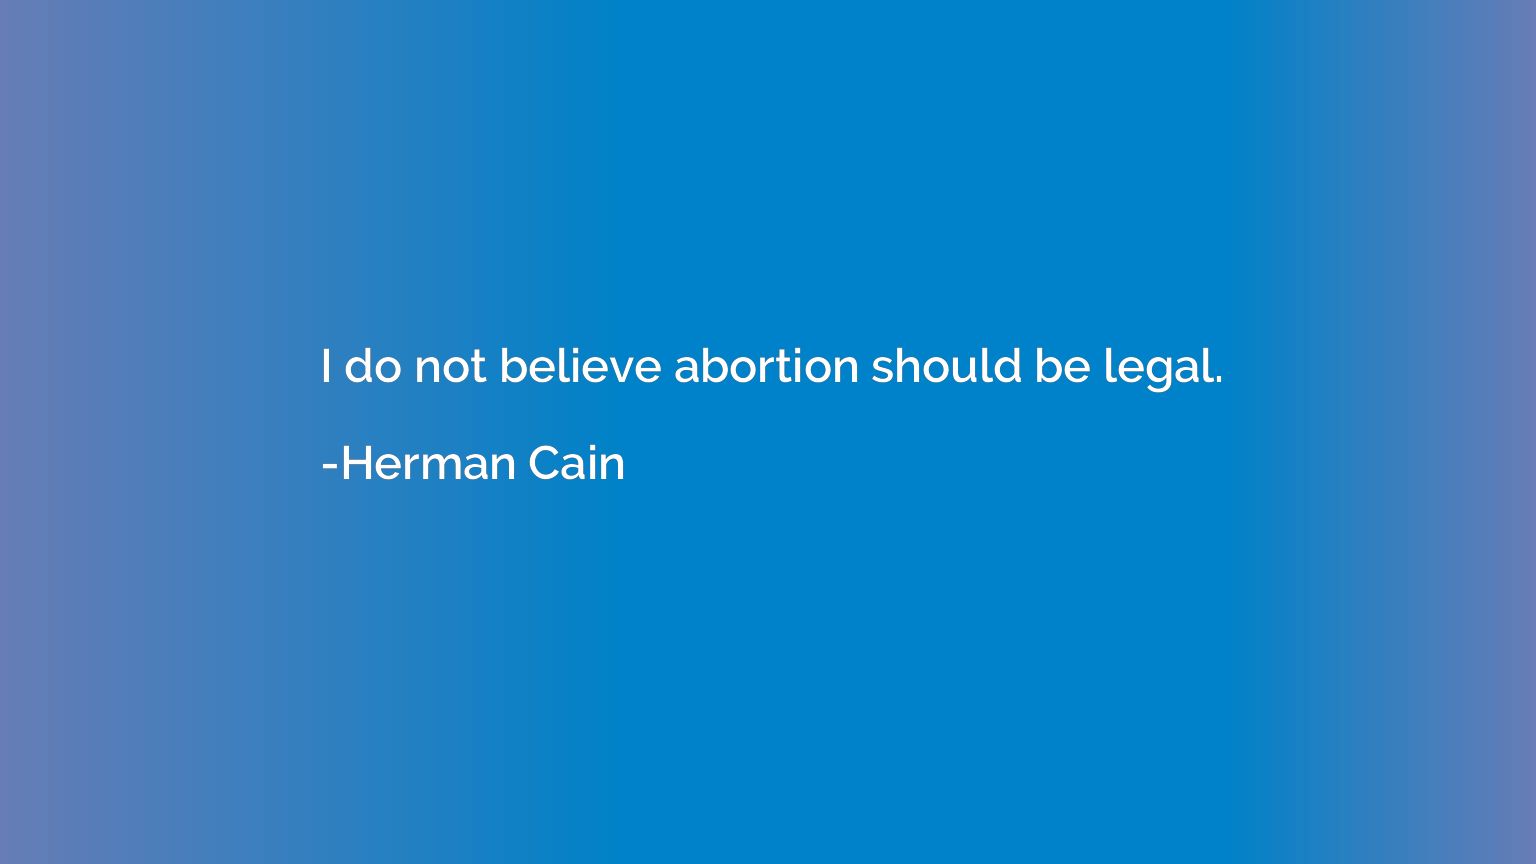 I do not believe abortion should be legal.